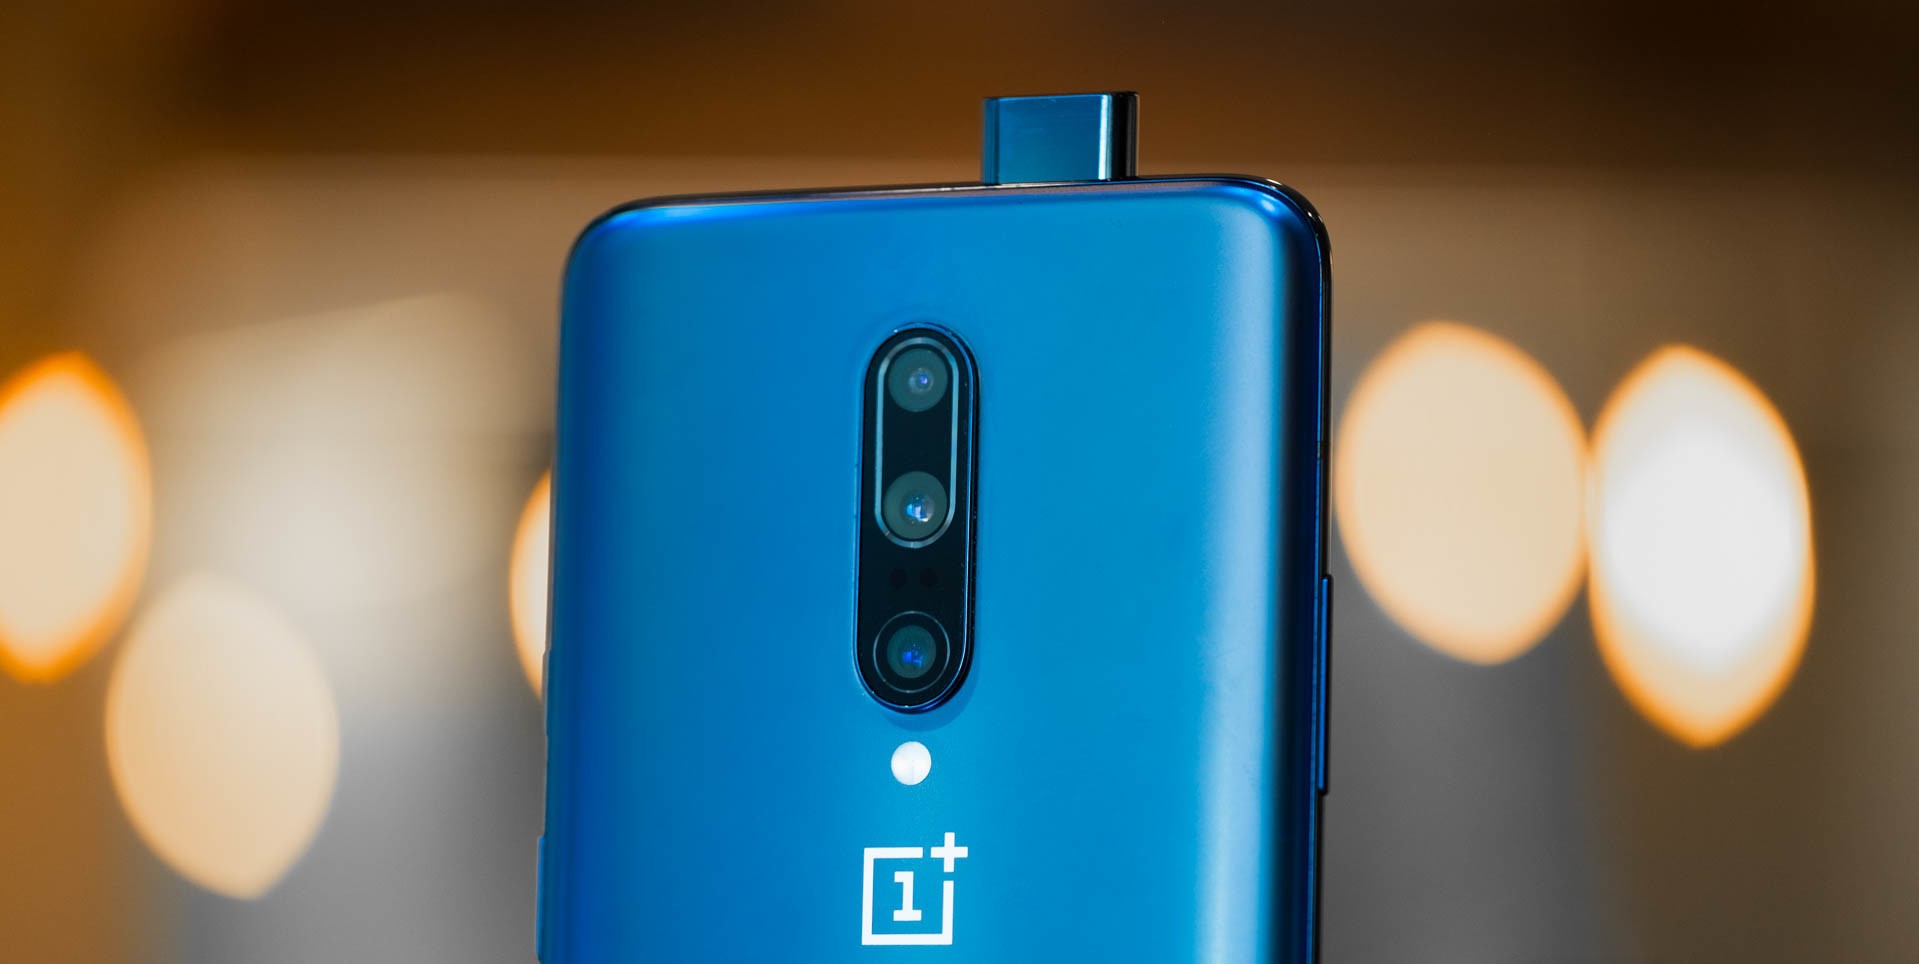 OxygenOS 12.1 OpenBeta 2 Released for Oneplus 7, 7Pro, 7T, 7T Pro with some System changes – Download Here